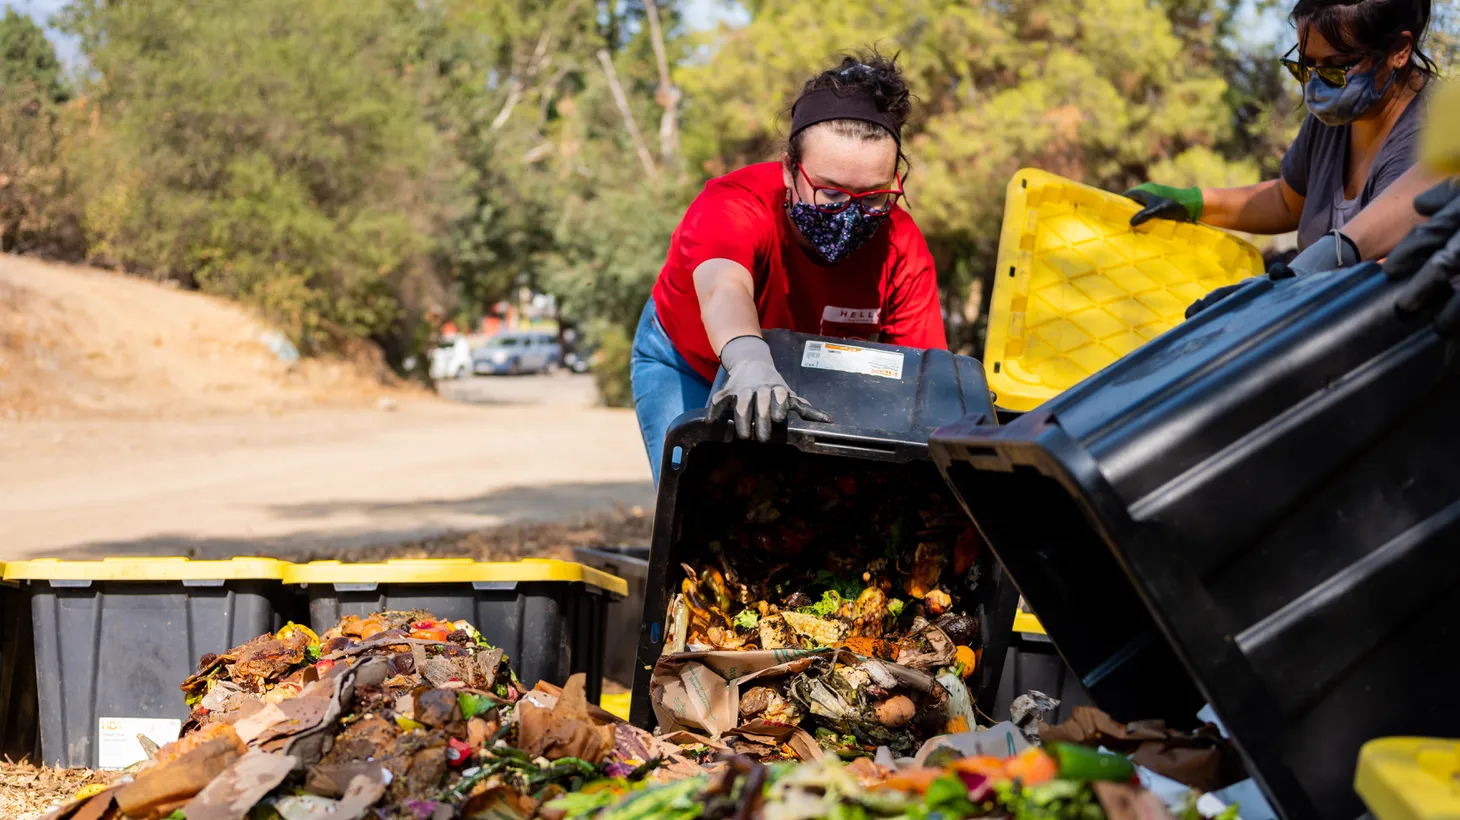 Volunteers work at LA Compost, just one hub for food waste collection under the new mandate in Los Angeles.